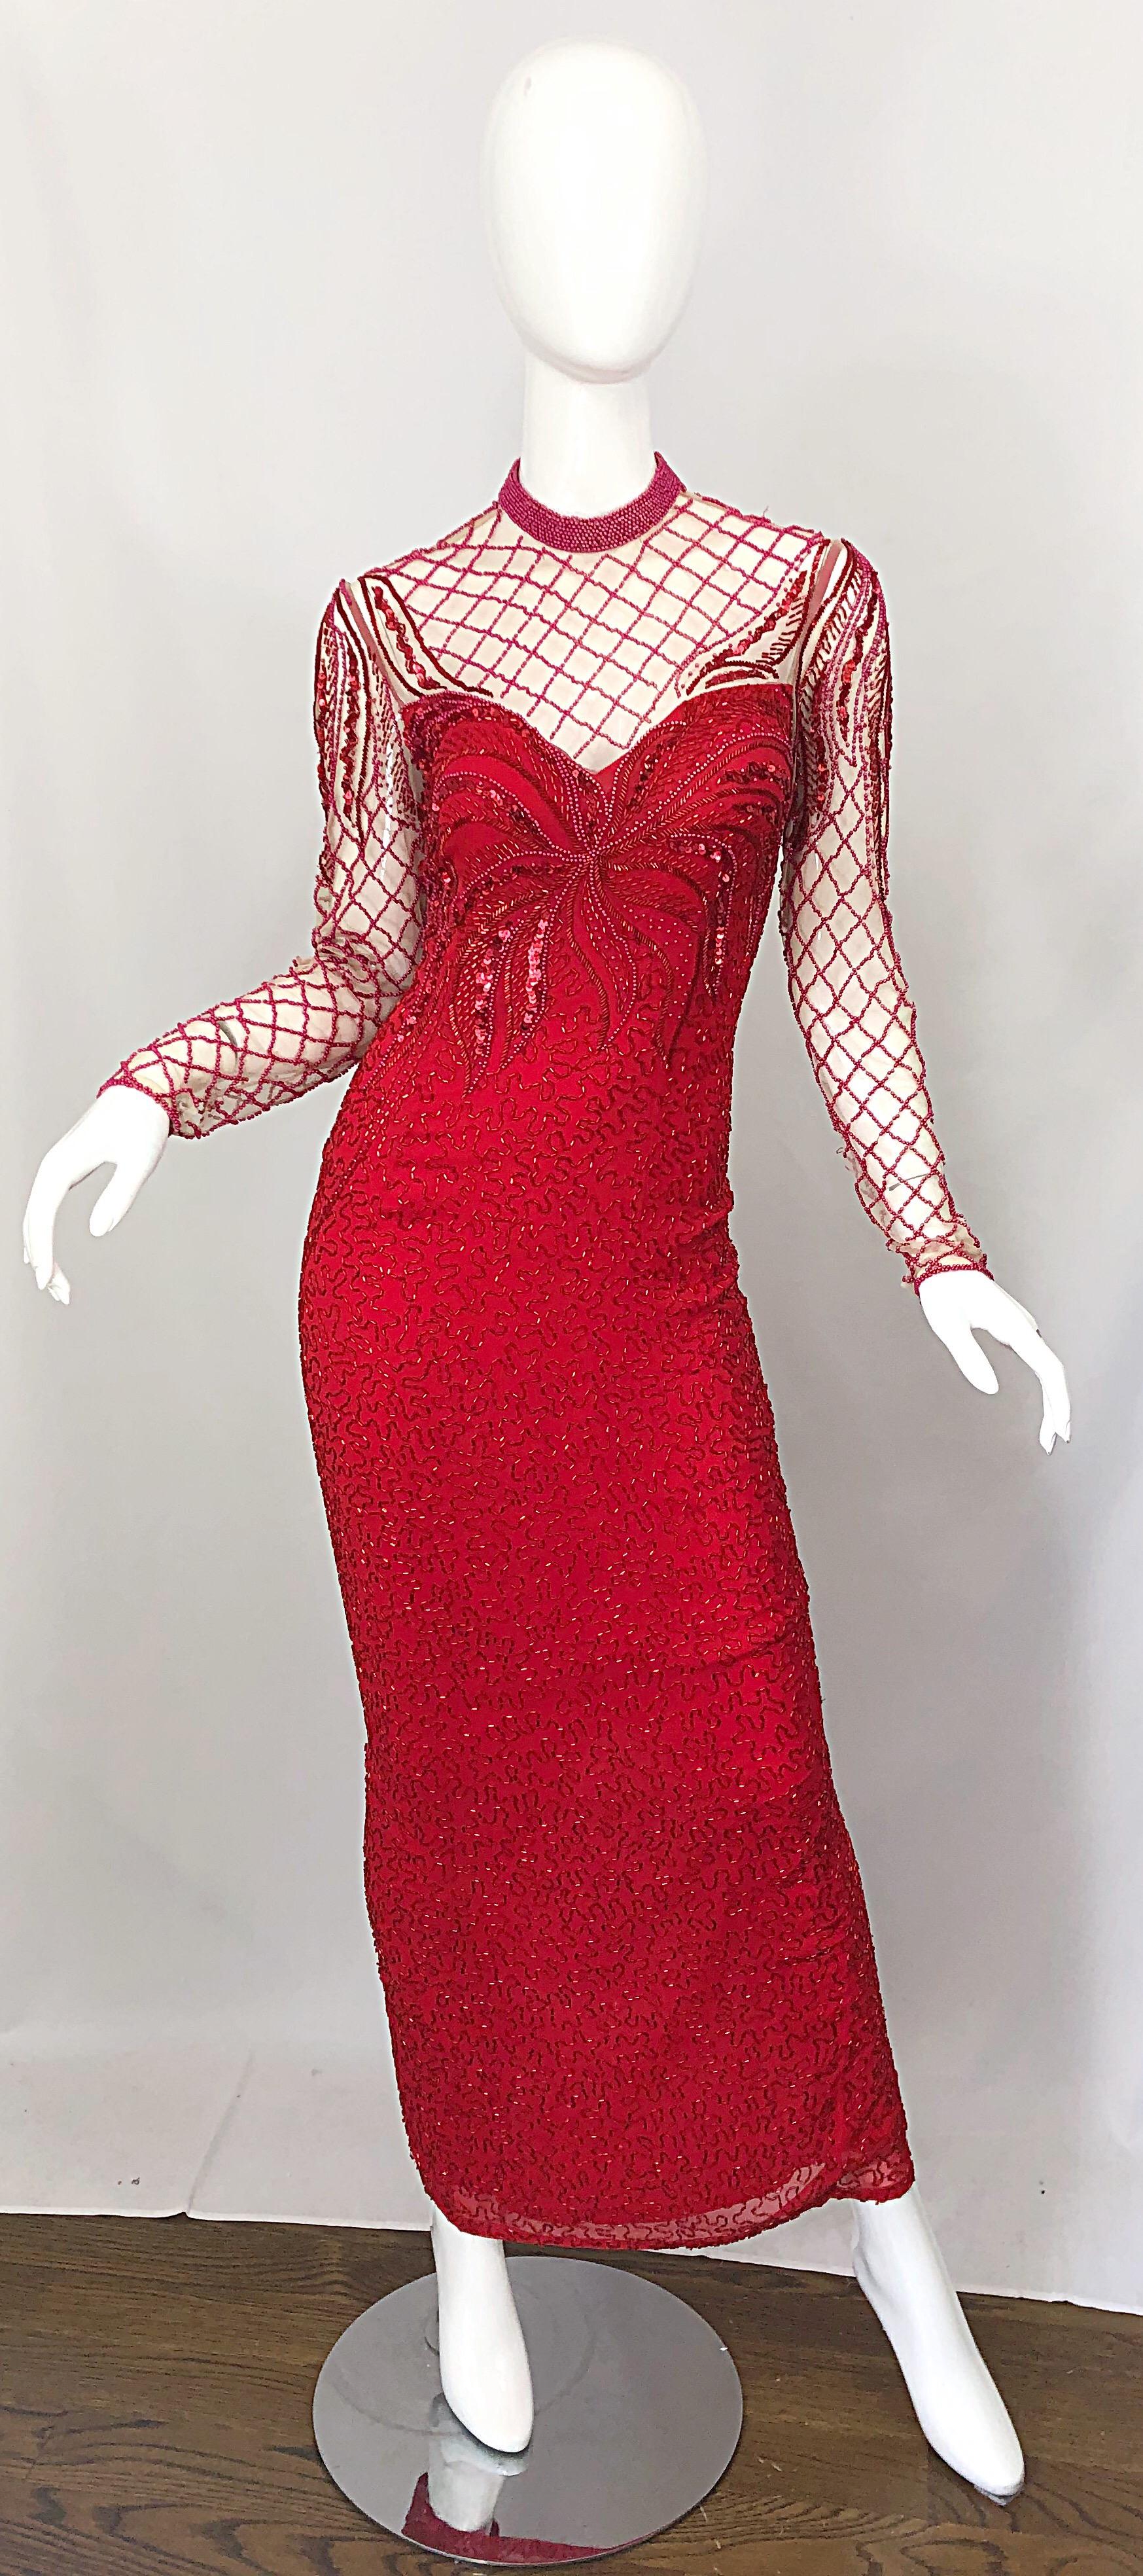 Sensational vintage early 90s OLEG CASSINI lipstick red silk chiffon fully beaded evening gown / dress ! Features thousands of hand-sewn beads and sequins throughout. Sheer mesh above the bust with beadwork. Hidden zipper up the back with